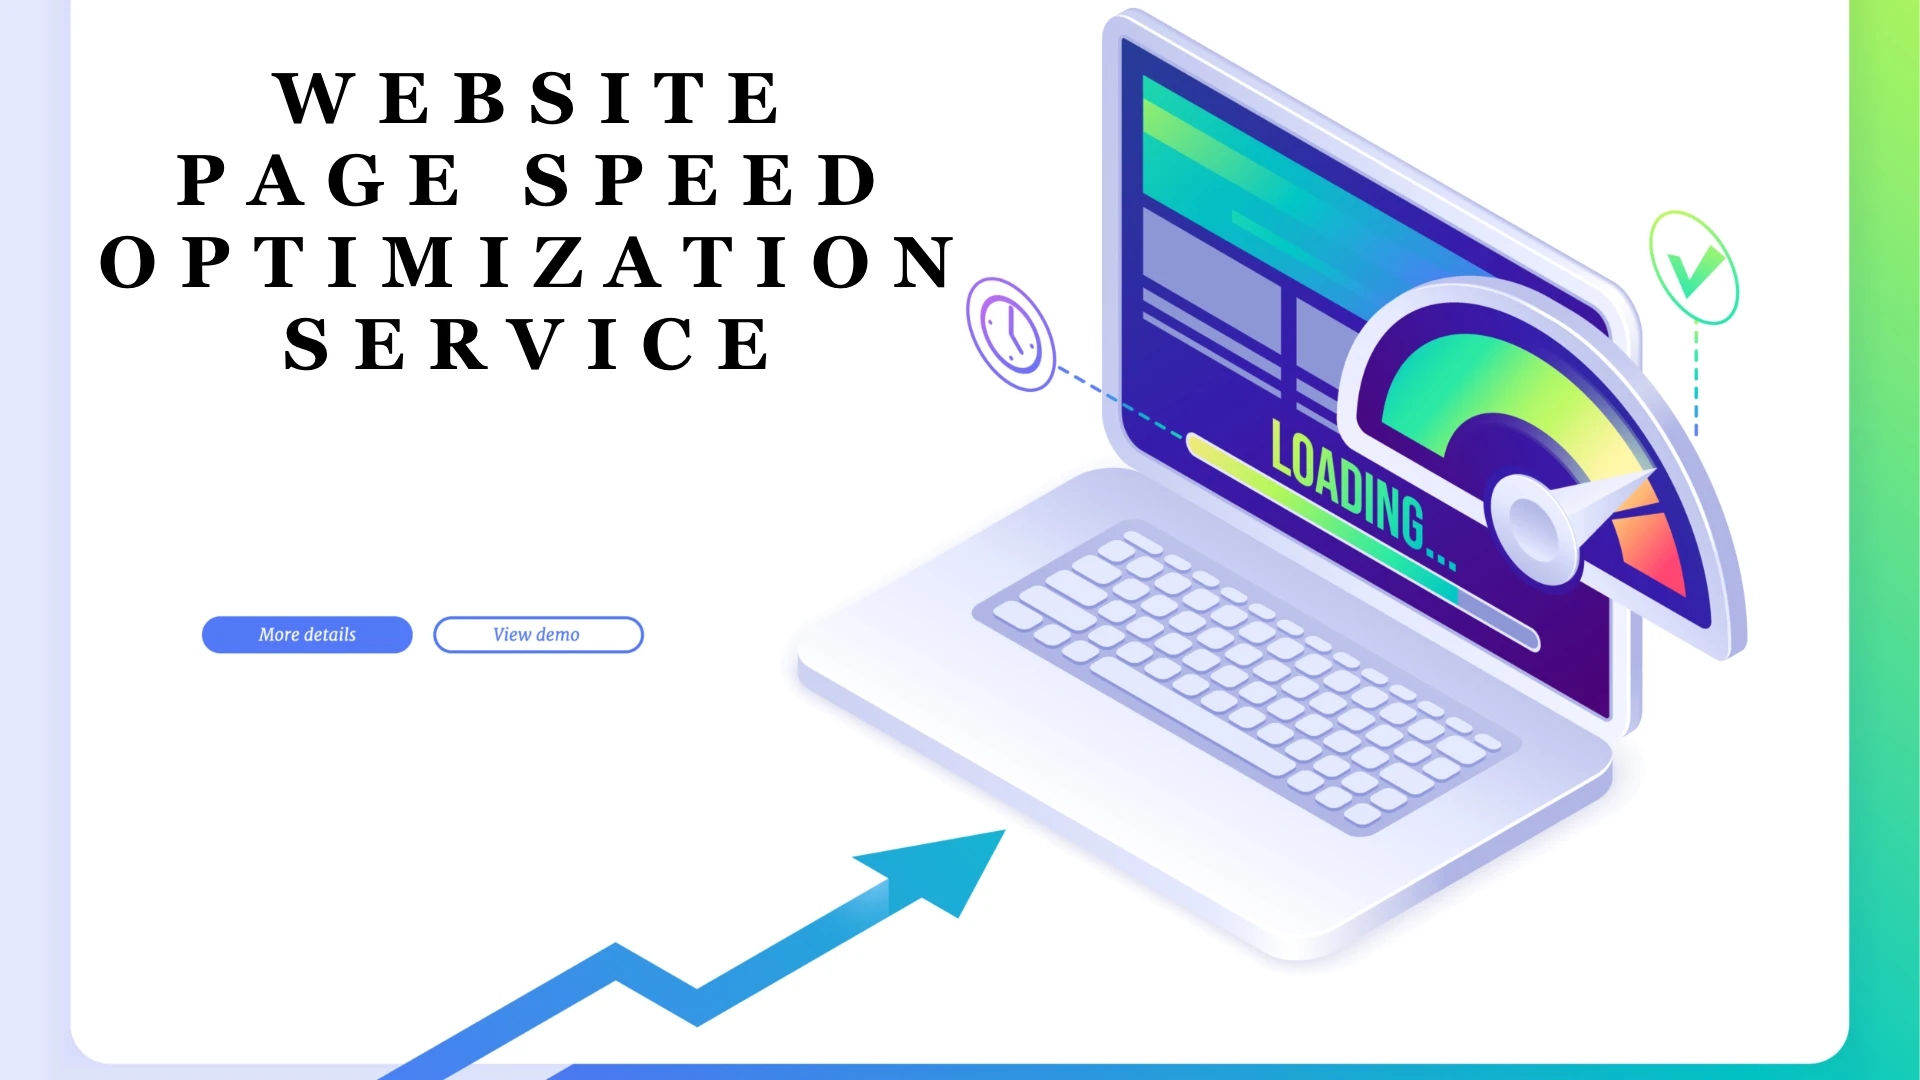 WEBSITE PAGE SPEED OPTIMIZATION SERVICE - BASIC - ANNUAL SUBSCRIPTION